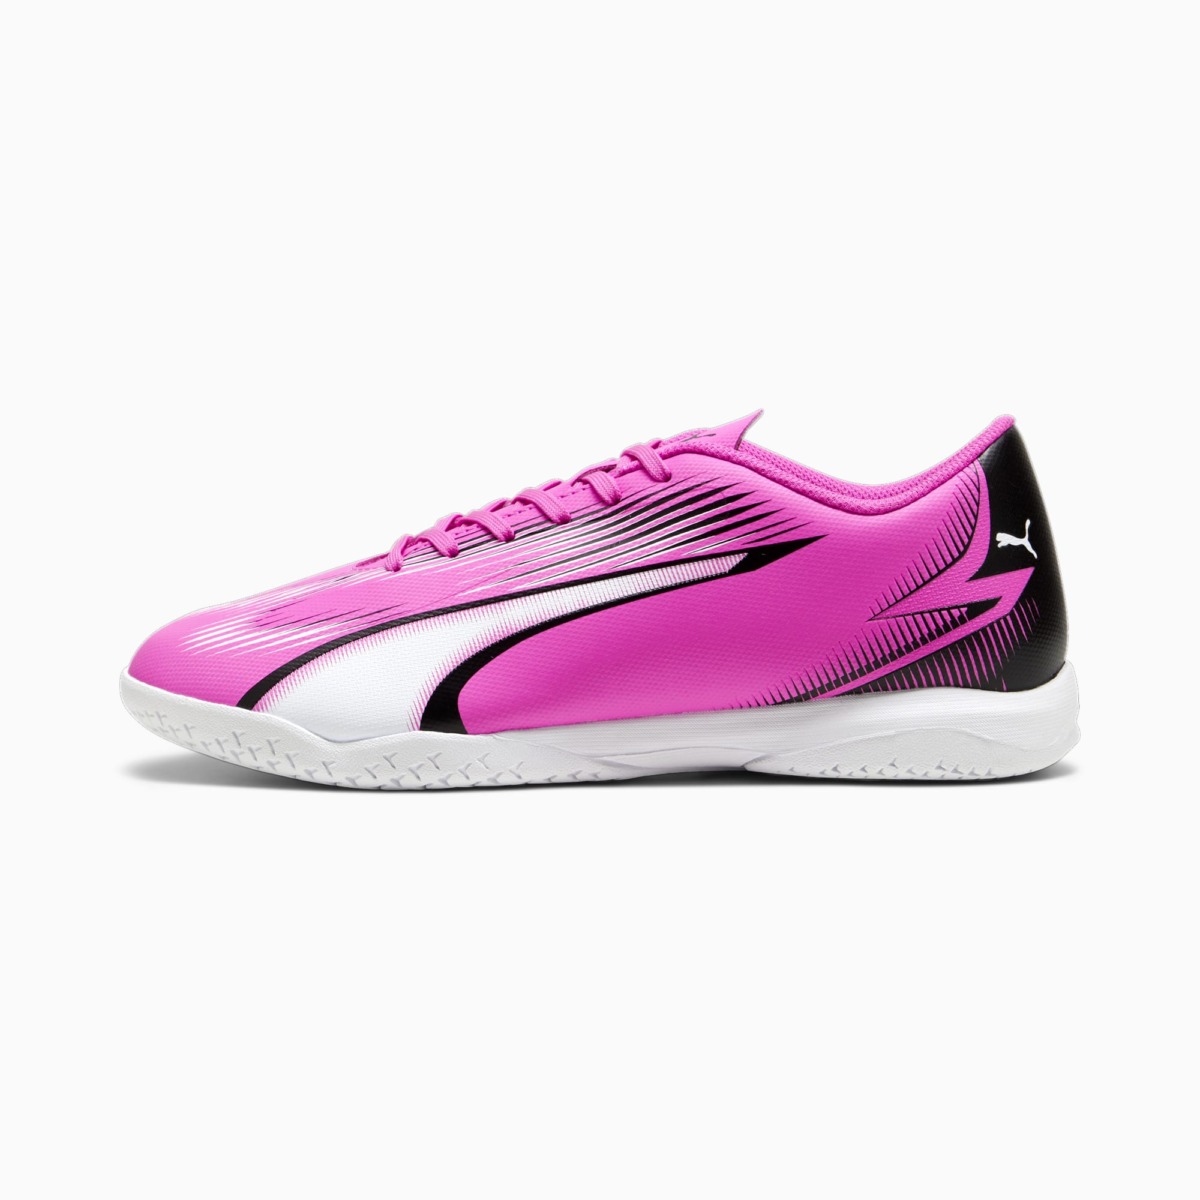 Soccer Shoes in Pink for Woman from Puma GOOFASH